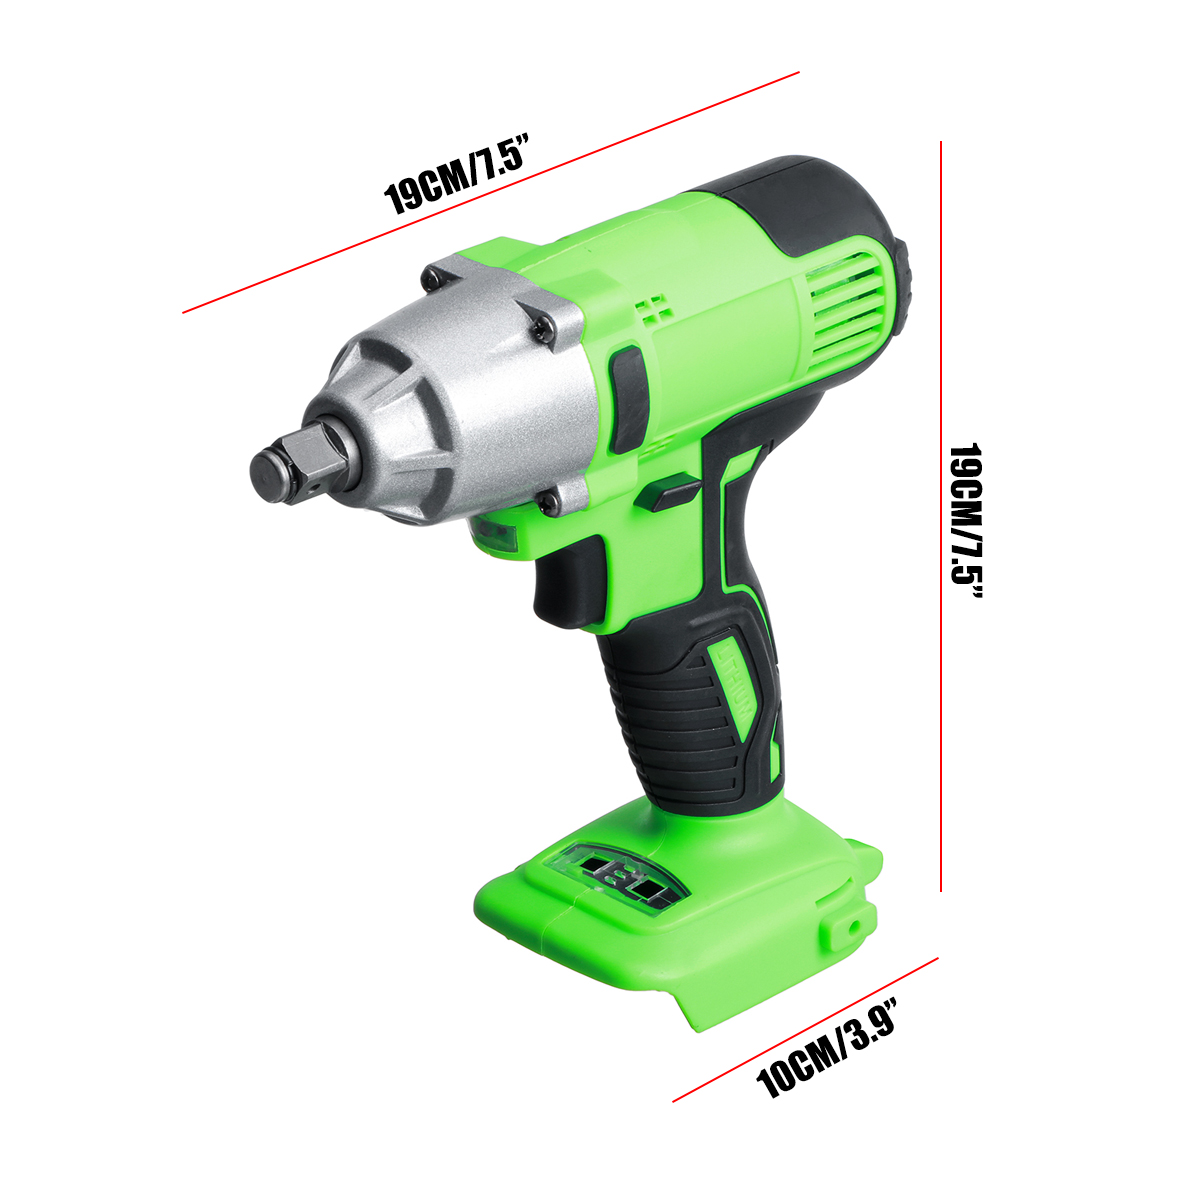 650NM-1600W-Brushless-Cordless-Electric-Drill-Screwdriver-For-Makita-18V-Battety-1783492-4